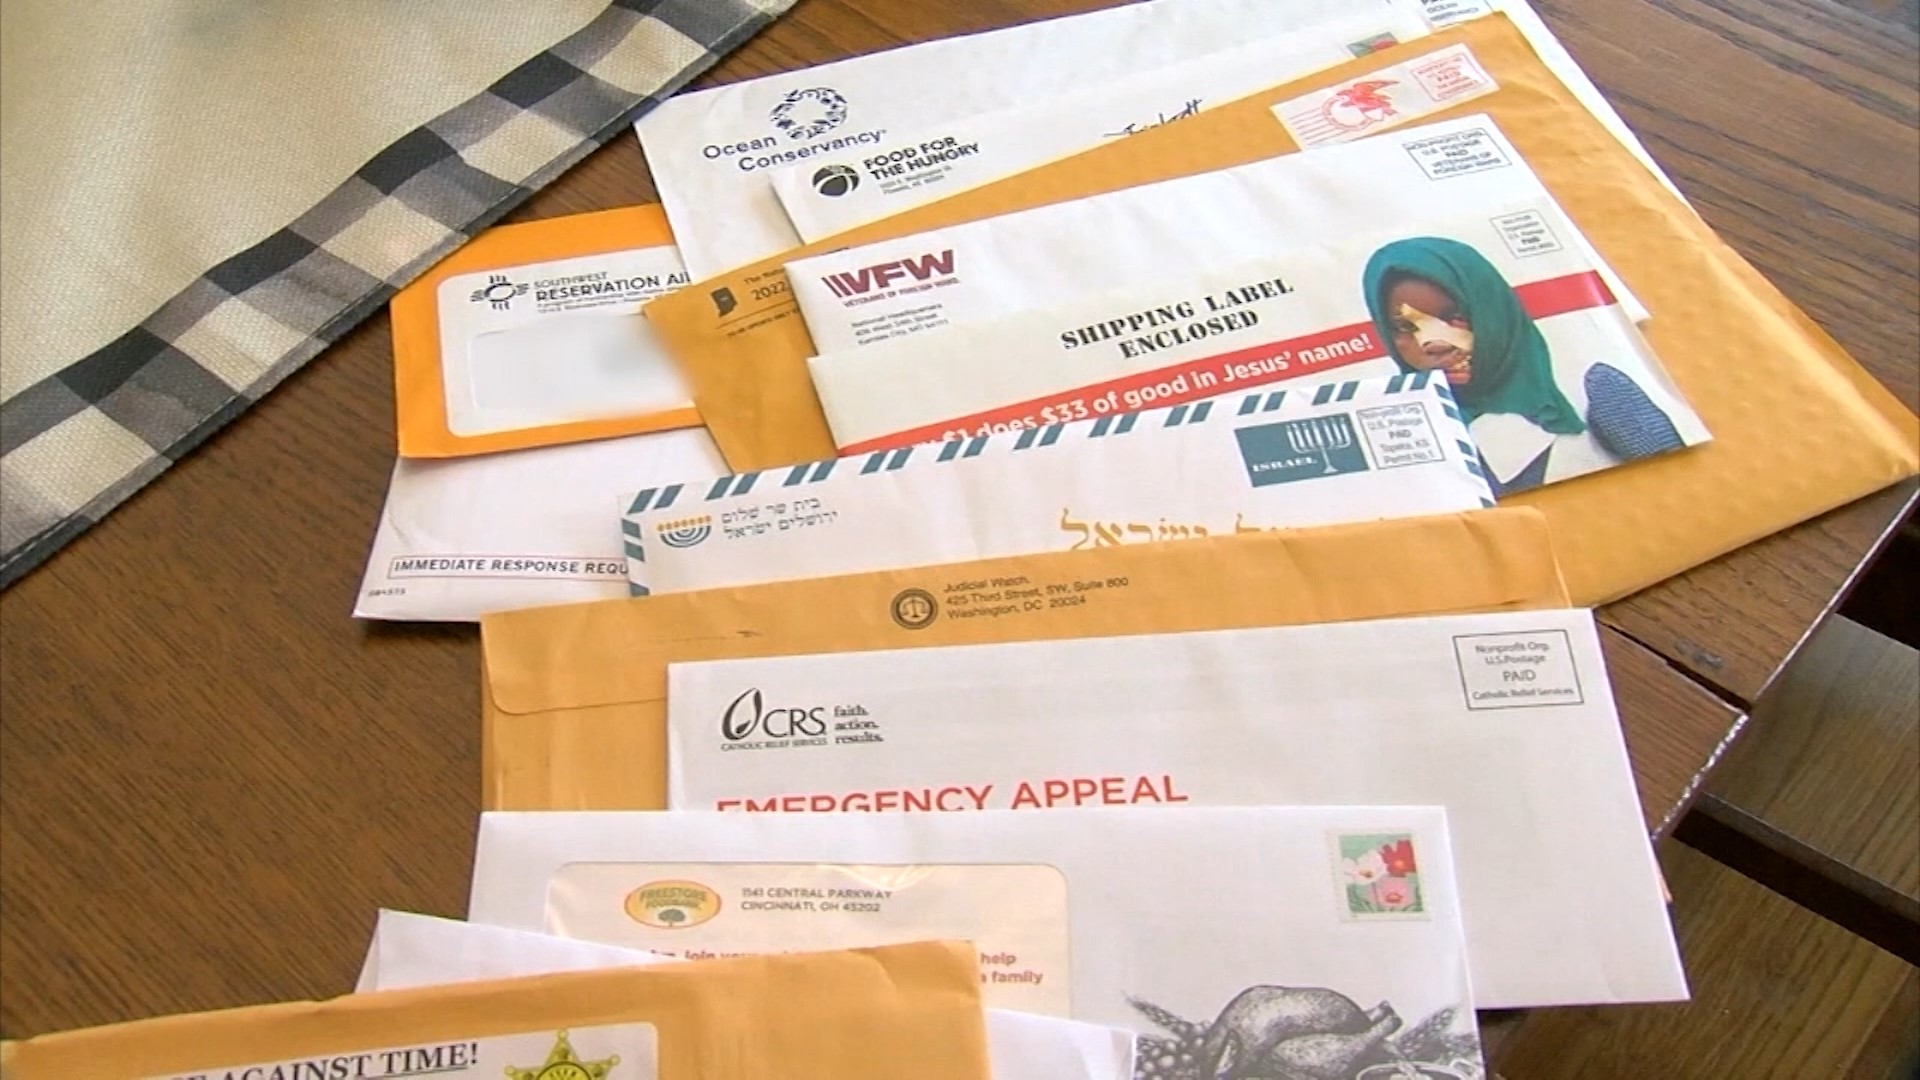 An Indiana family can't stop dozens of charity solicitations from showing up, swamping their older mother. Here's how you can stop it.